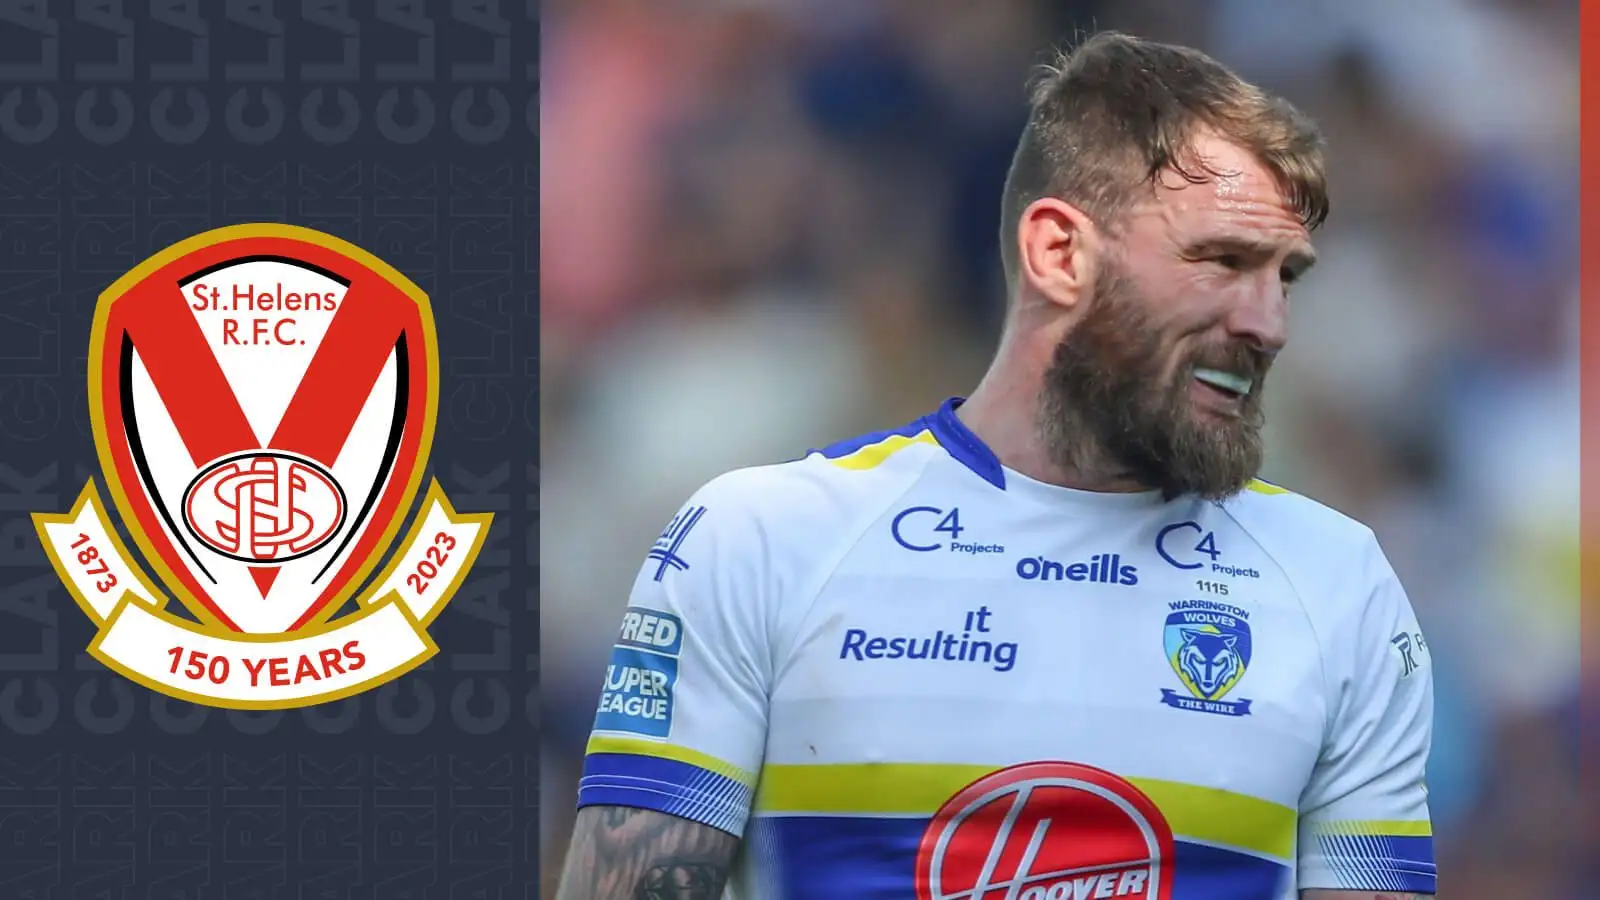 Daryl Clark: St Helens move confirmed with Warrington Wolves star signing long-term deal